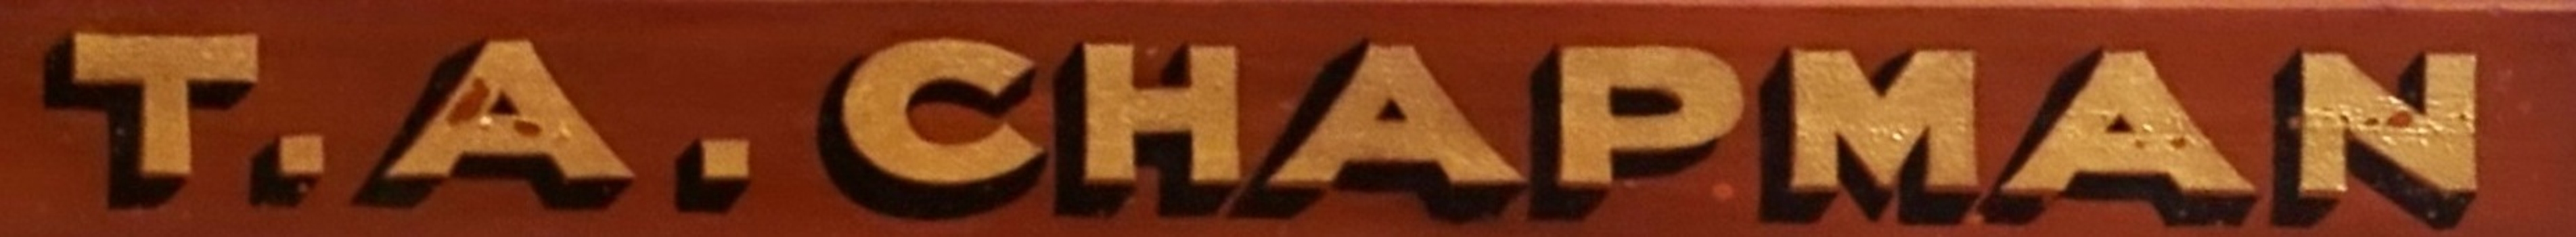 Gold leaf text on timber advertising the maker's name